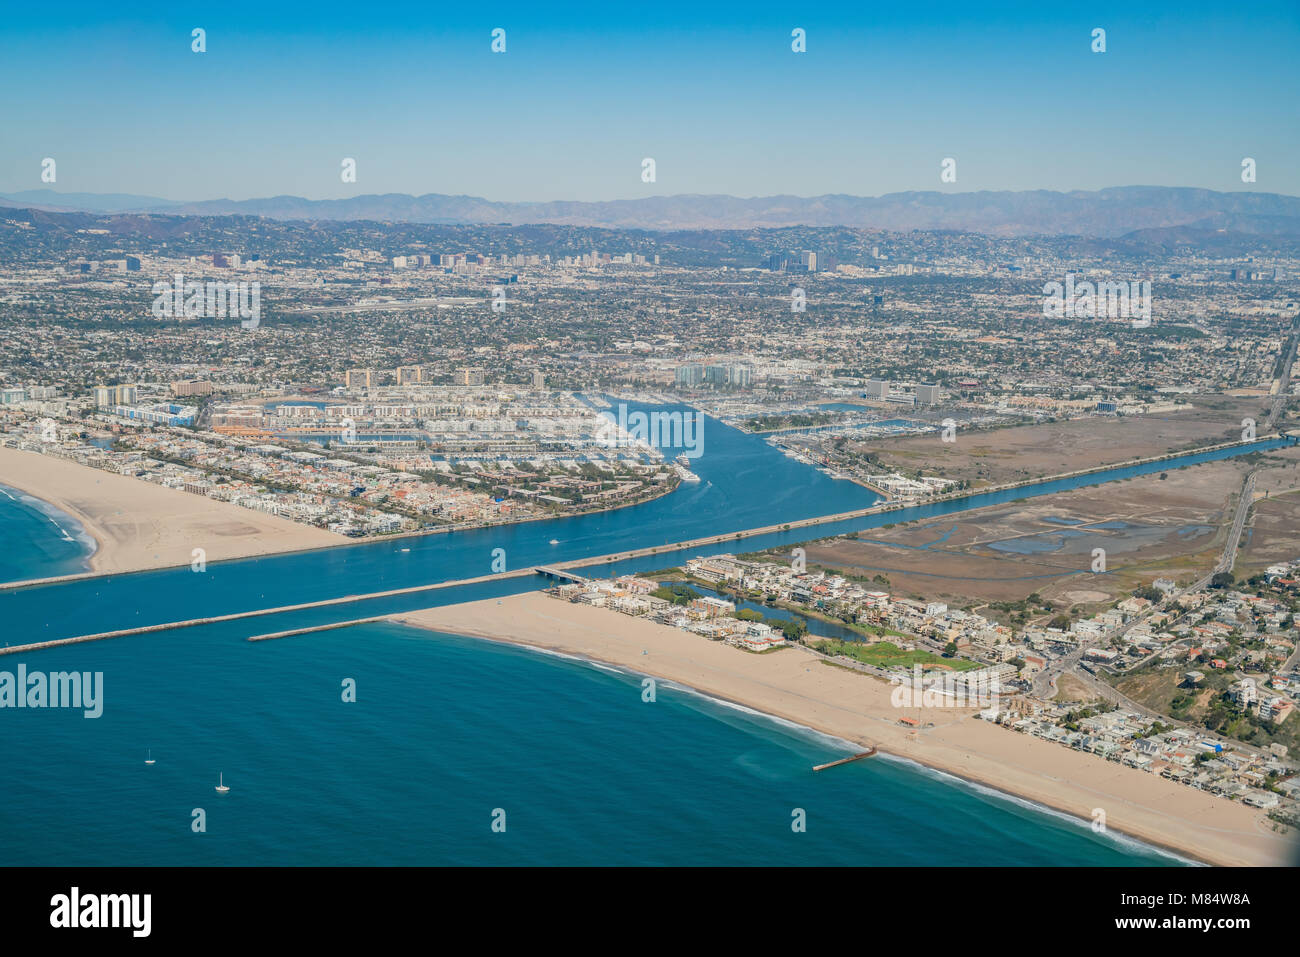 Aerial view of Marina Del Rey and Playa Del Rey aera from airplane, Los Angeles, California Stock Photo